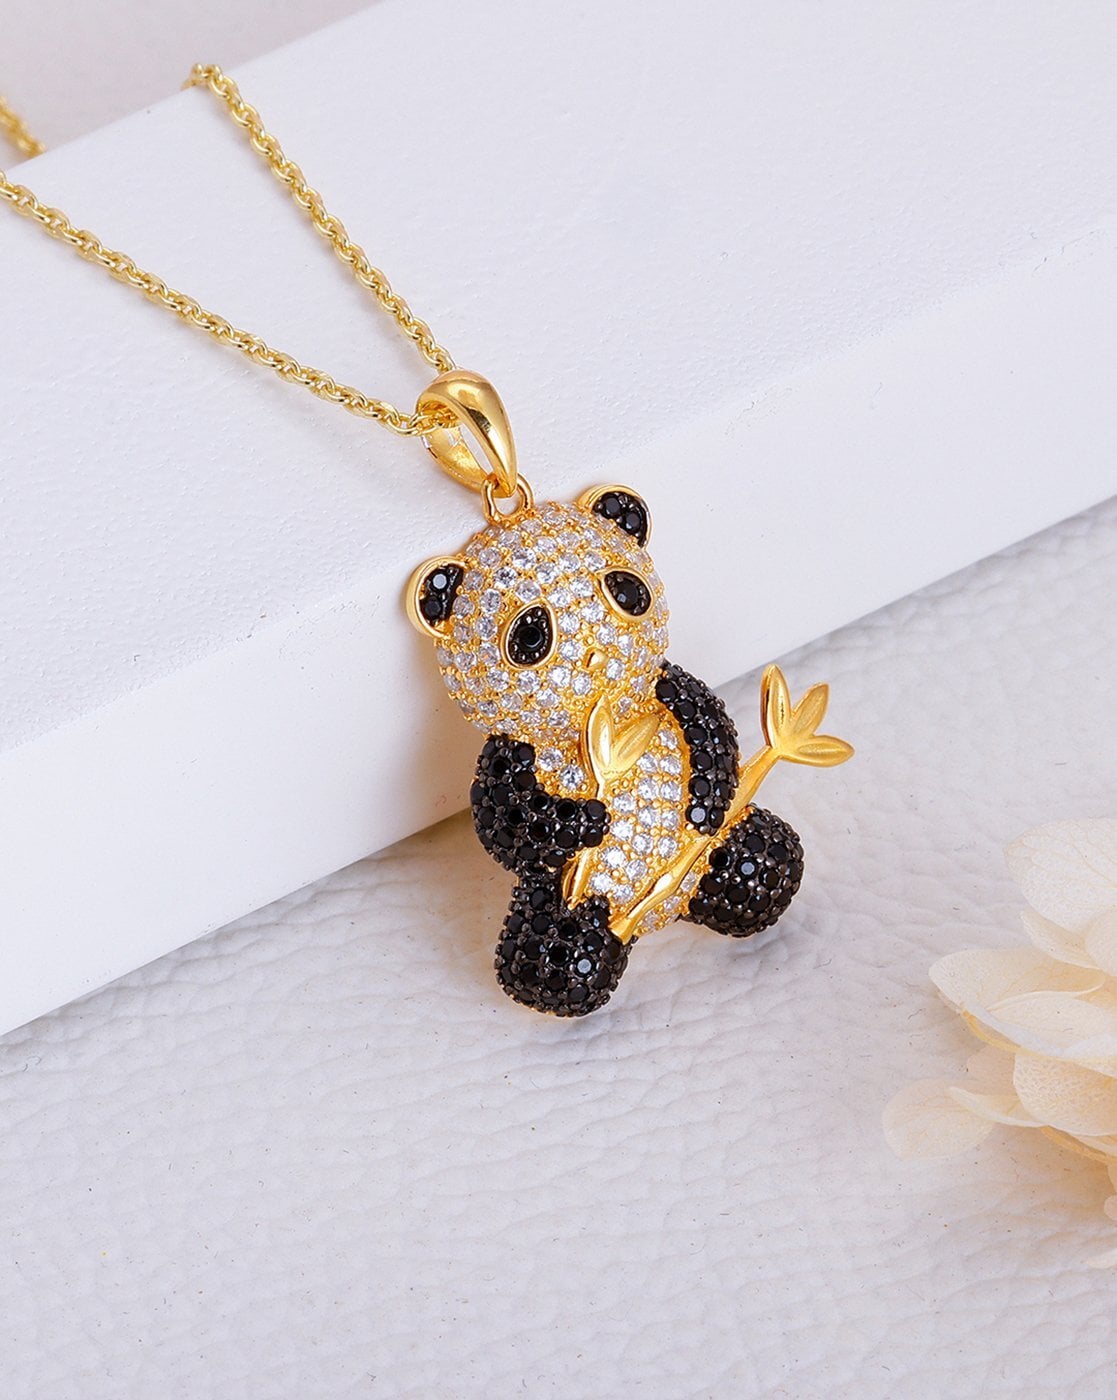 Cute panda necklace and earrings combo trendy